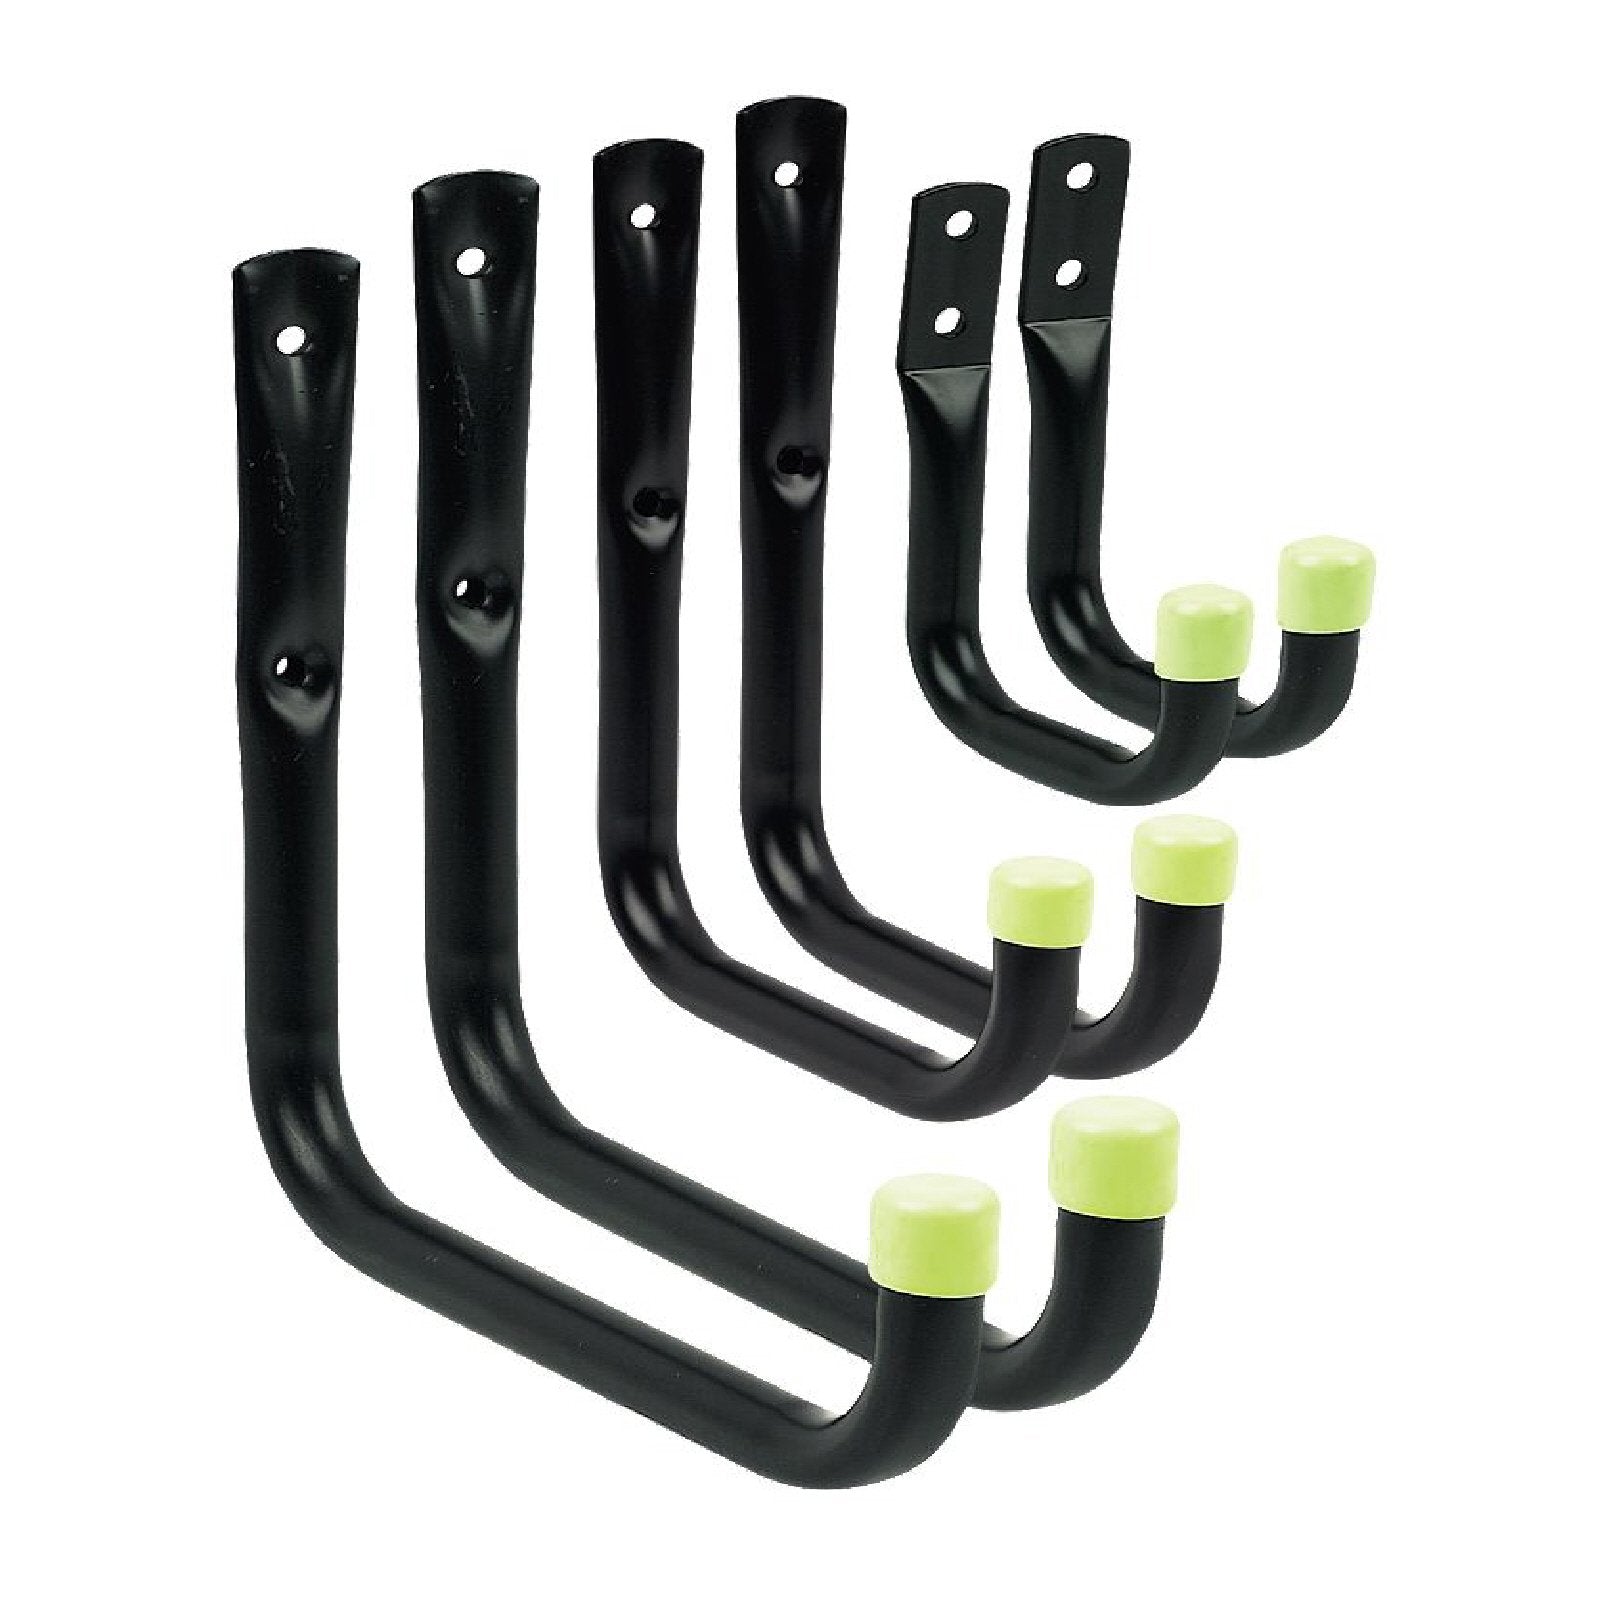 6 x Assorted Storage Hooks Wall Mounted, Ladders Garage Tools